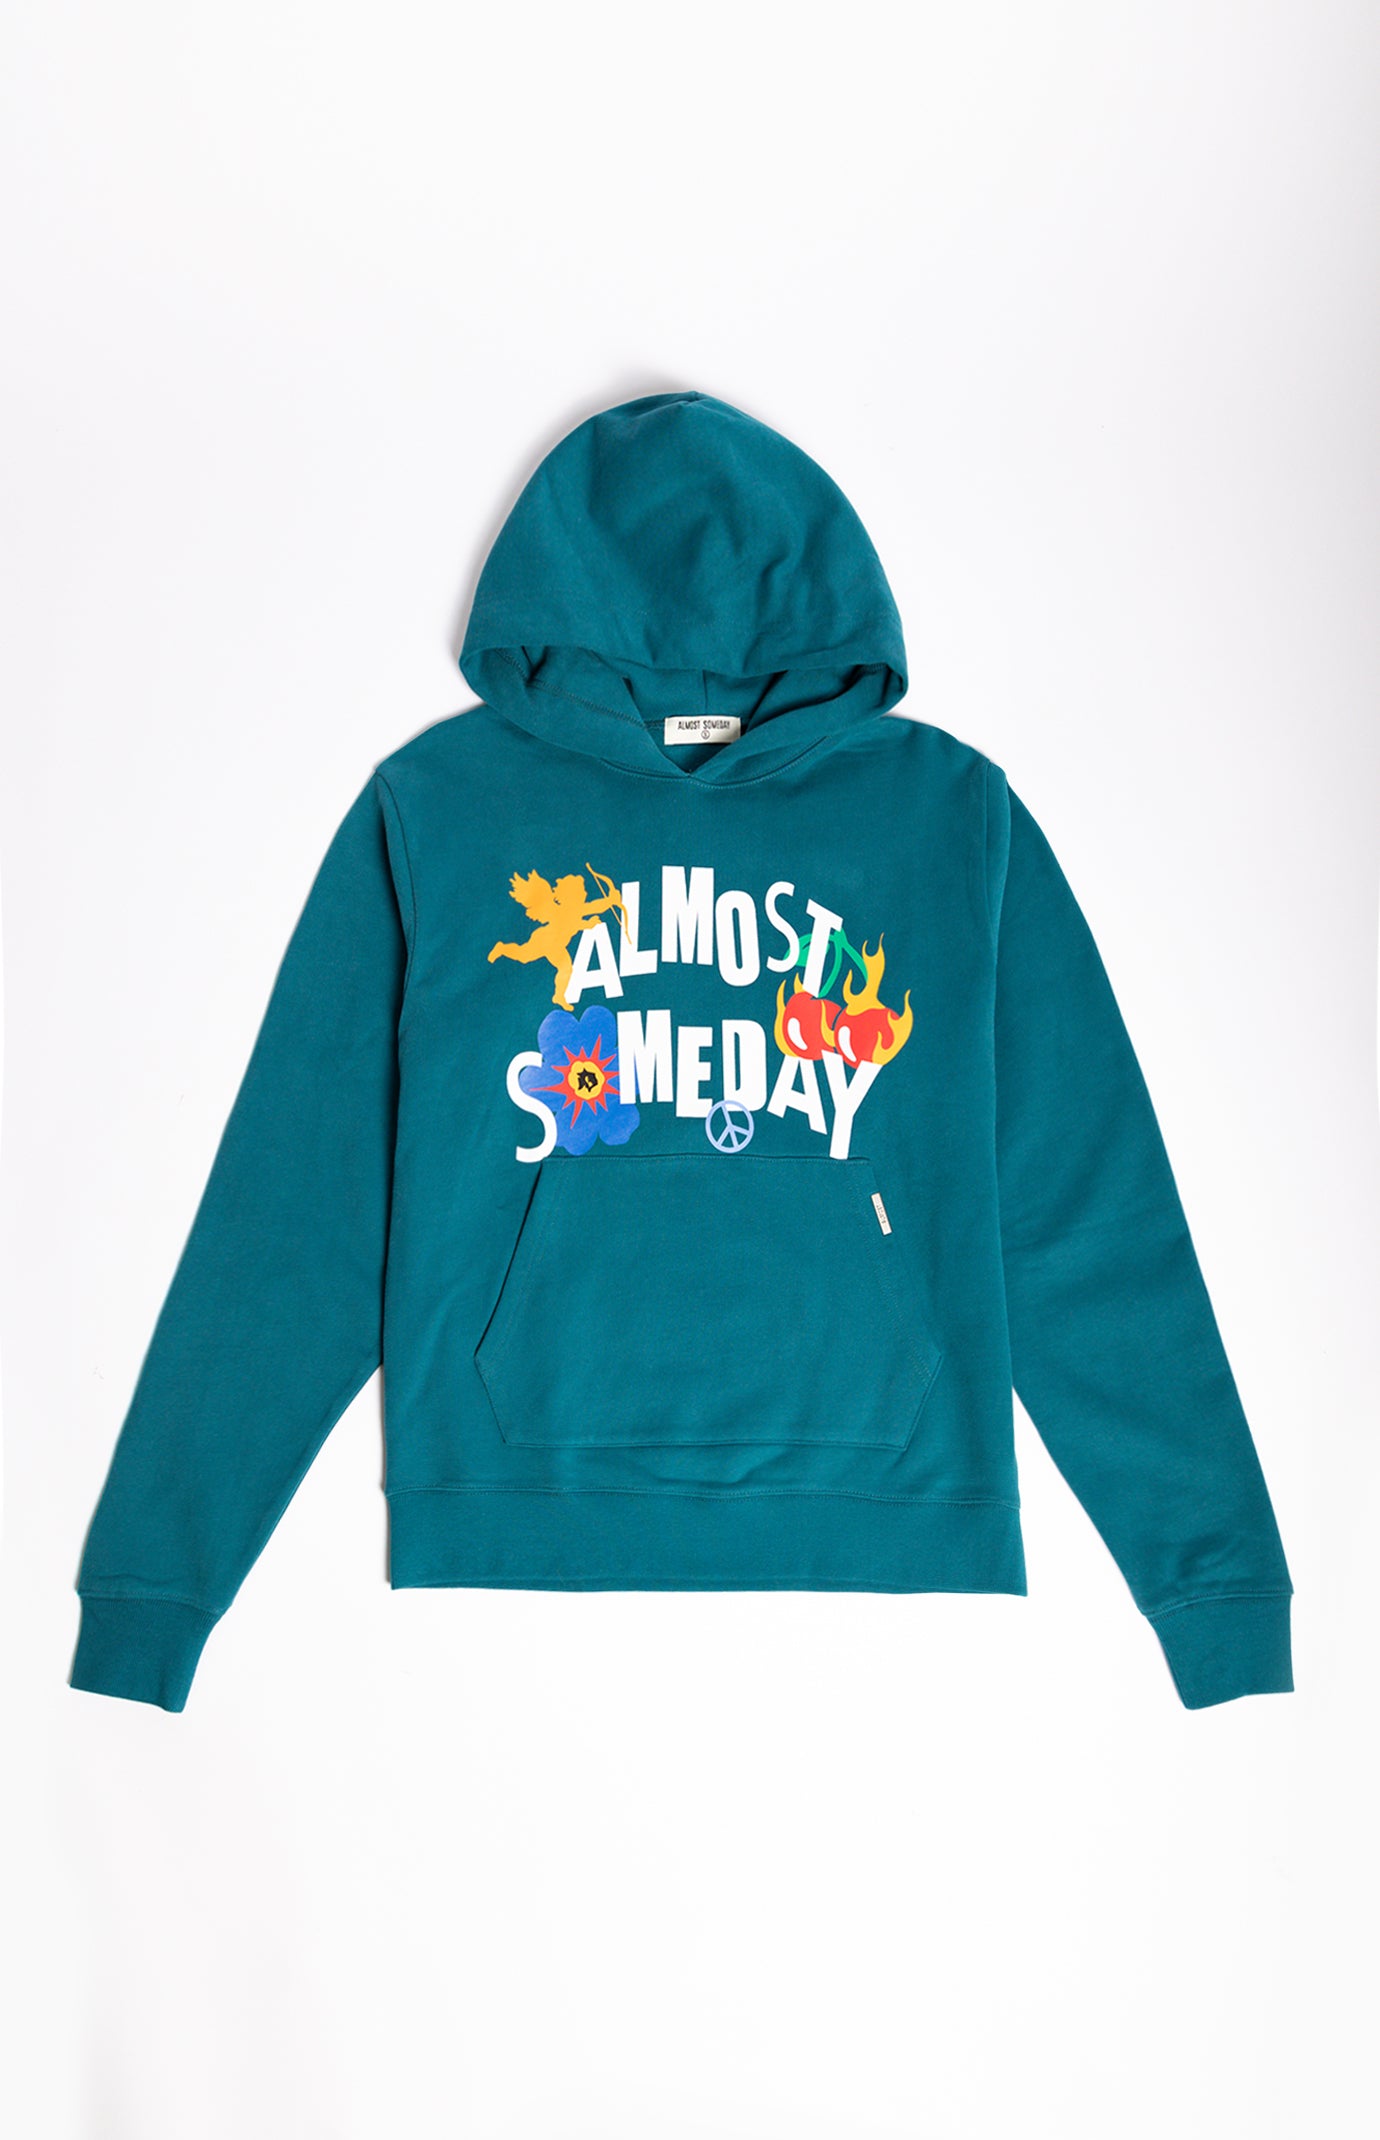 Foundation Hoodie (Black) - ALMOST SOMEDAY